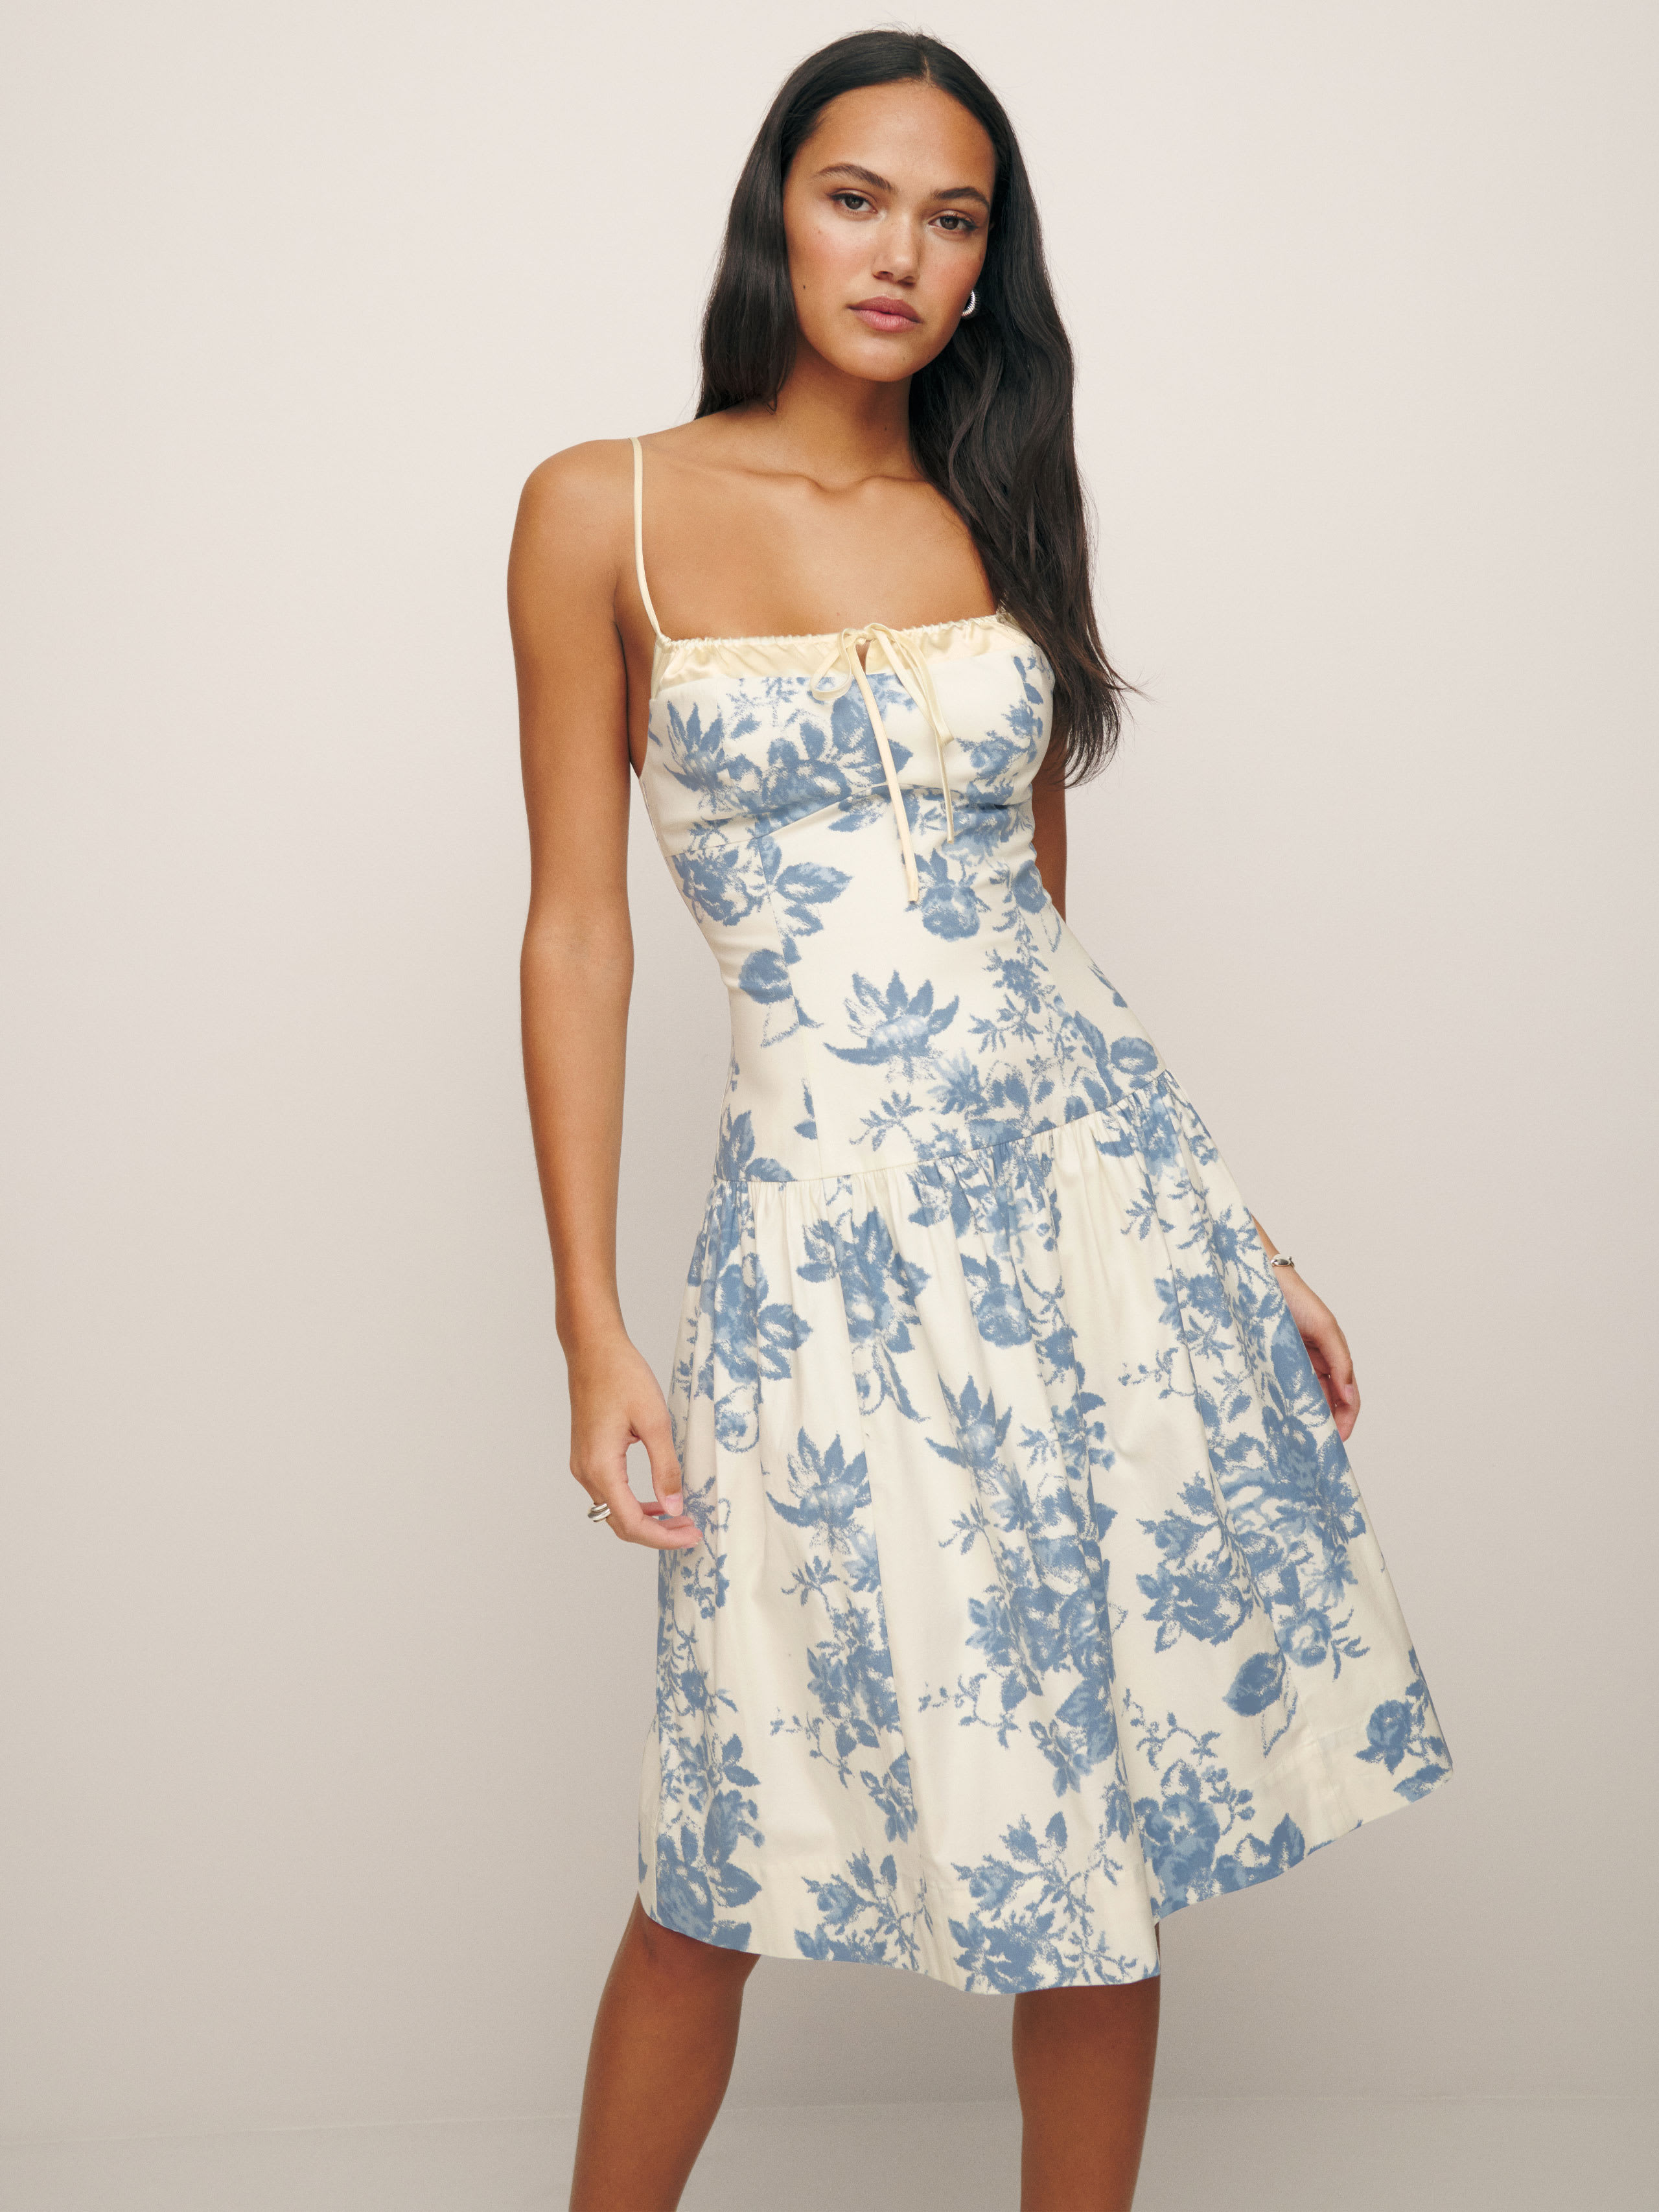 Reformation Analise Dress In Courtier